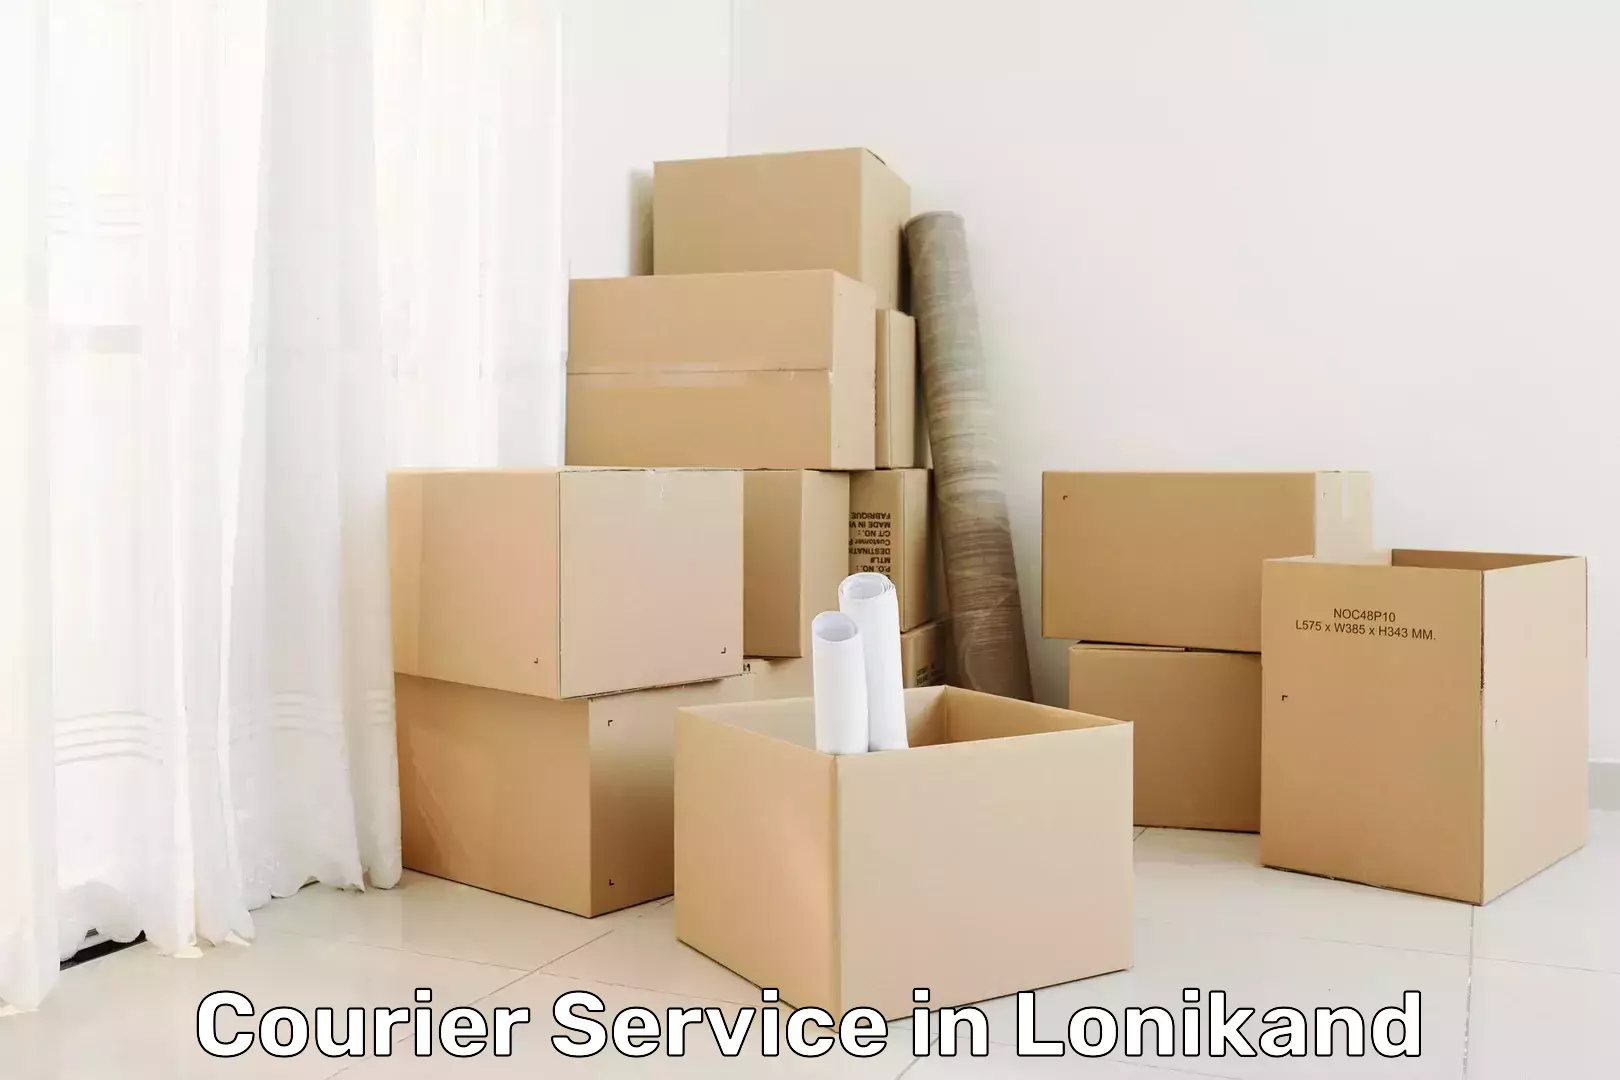 Express postal services in Lonikand